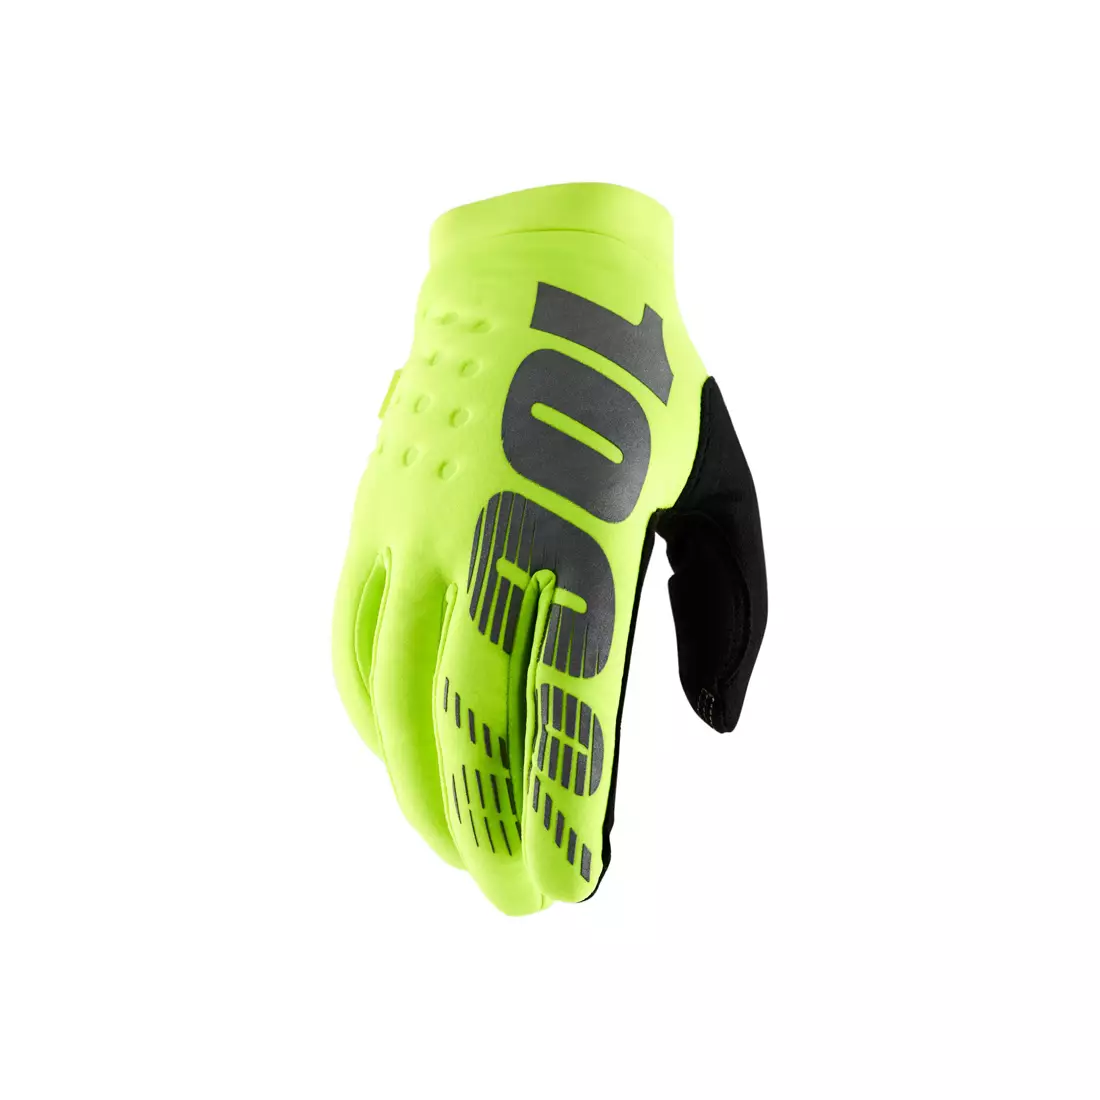 100% bicycle gloves brisker cold weather fluo yellow STO-10016-004-12